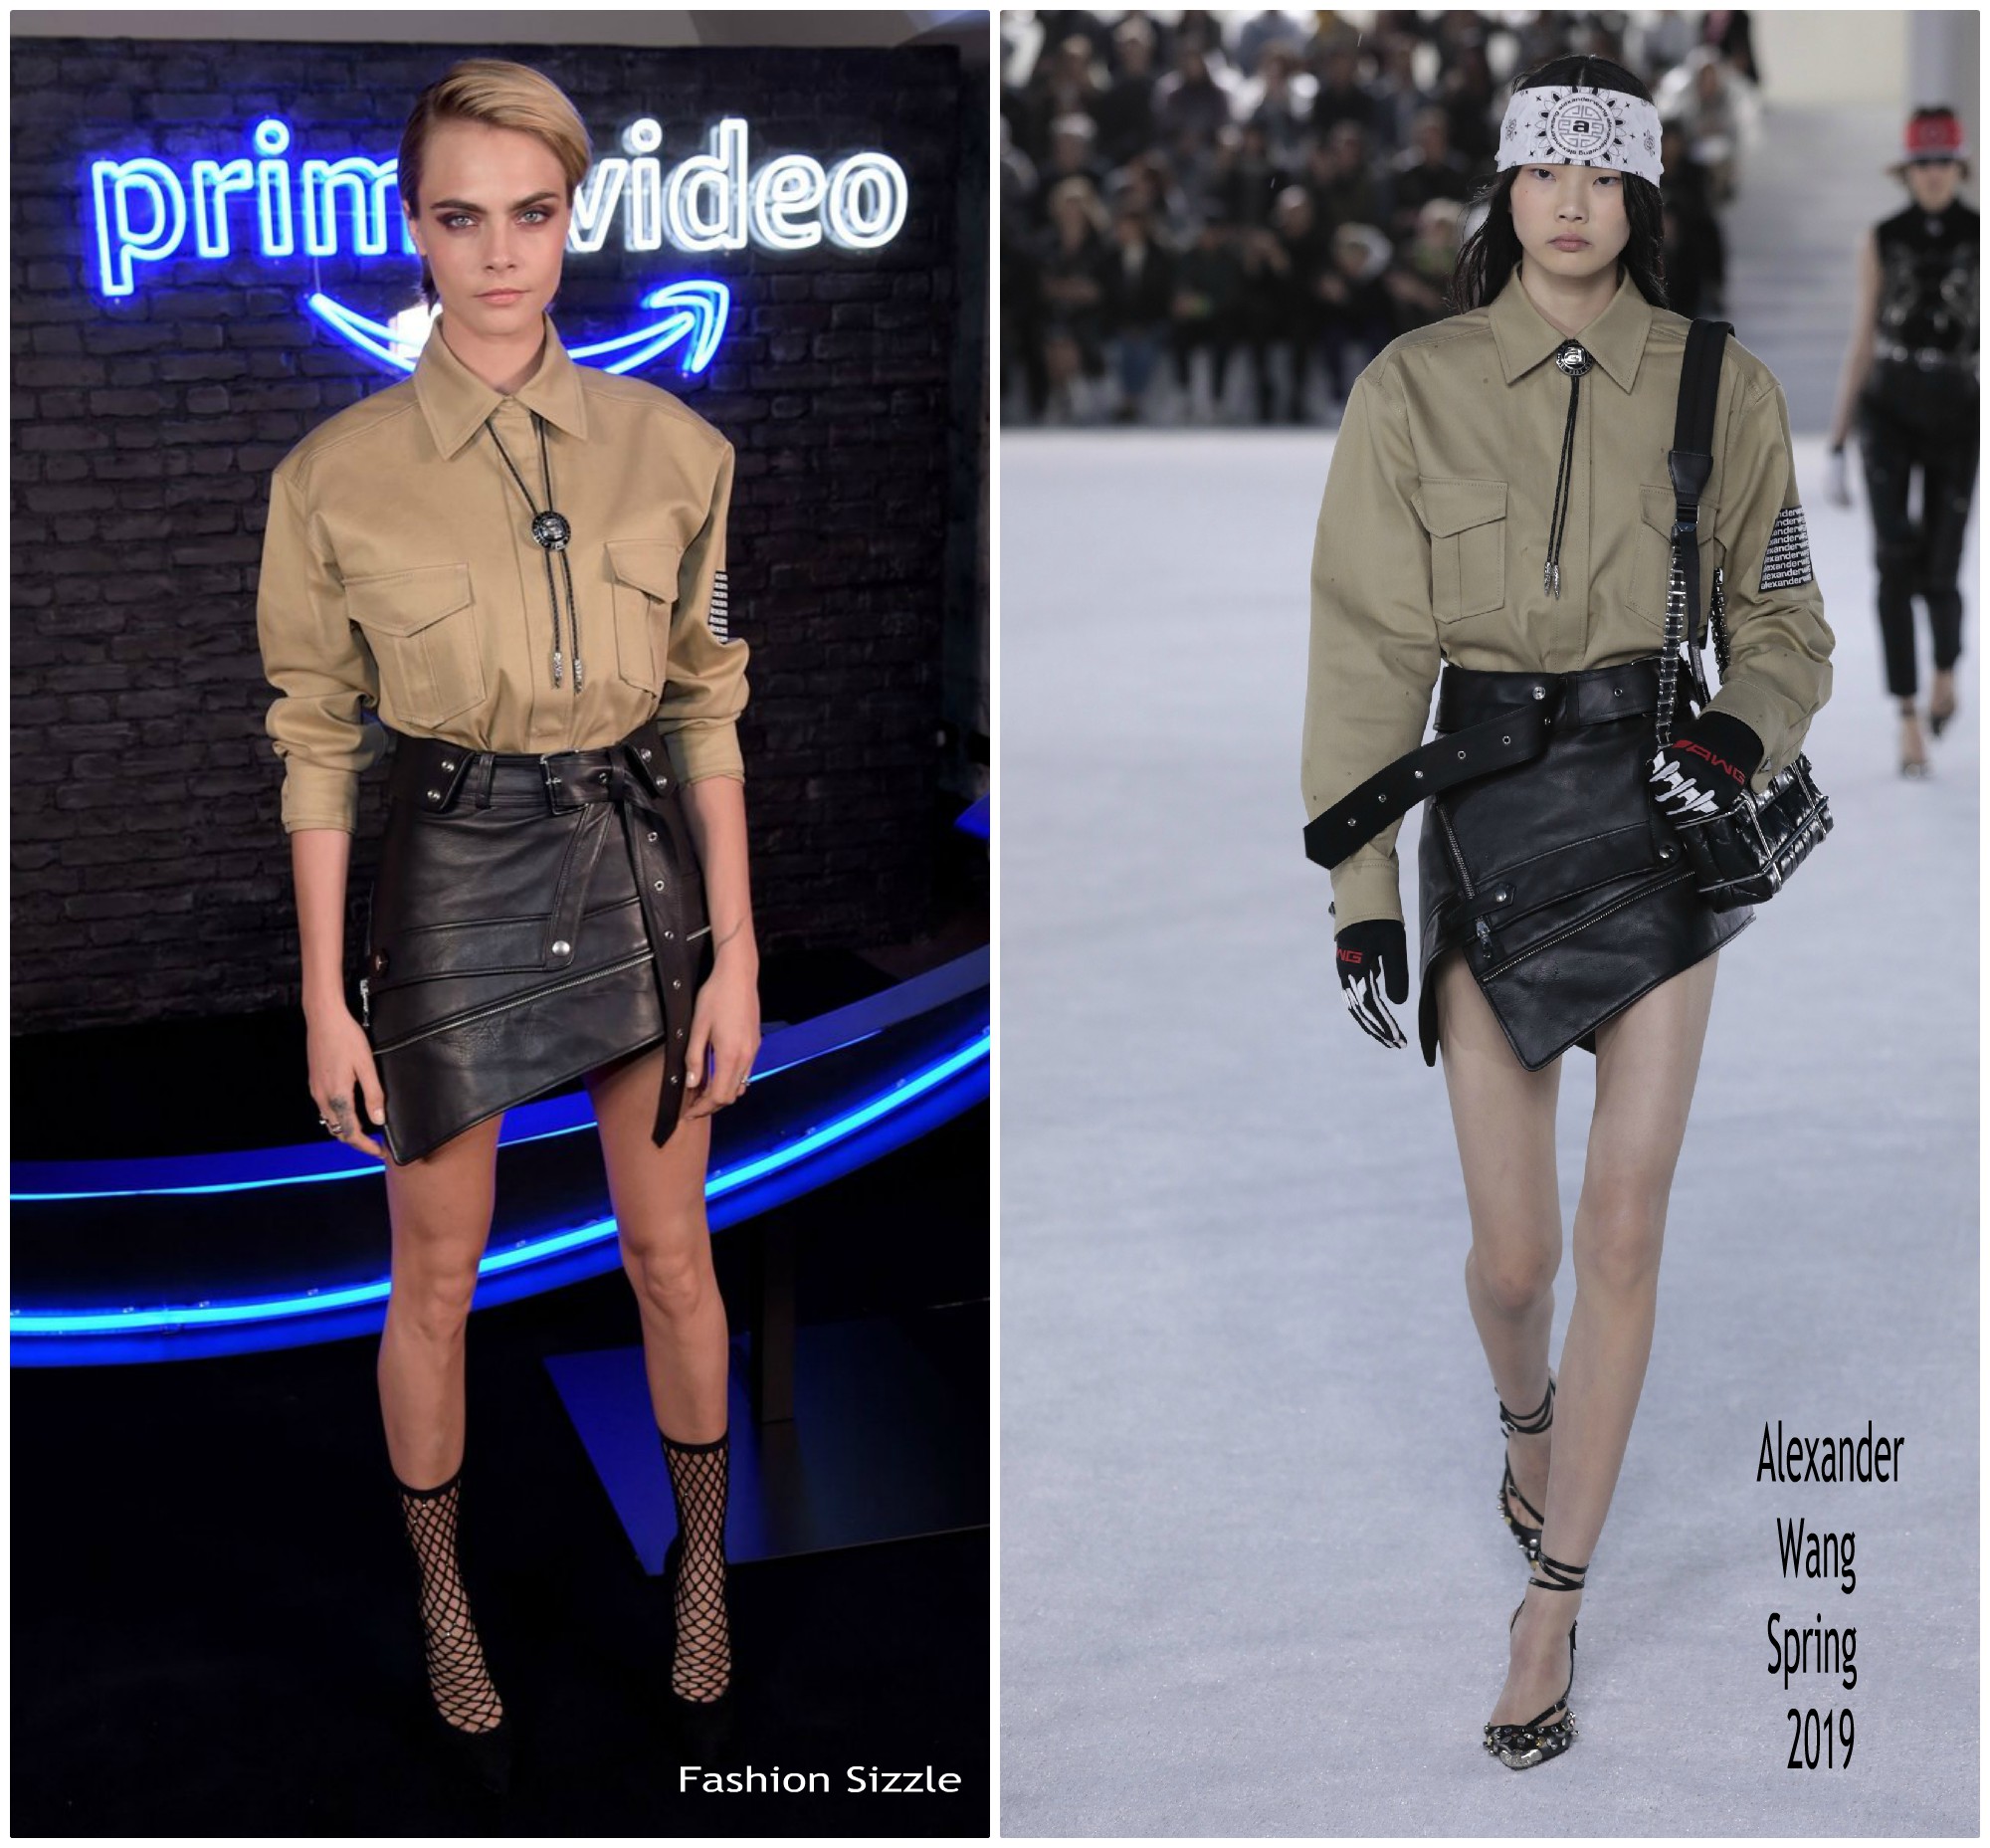 Cara Delevingne In Alexander Wang  @ Amazon Prime Video Europe Autumn Party